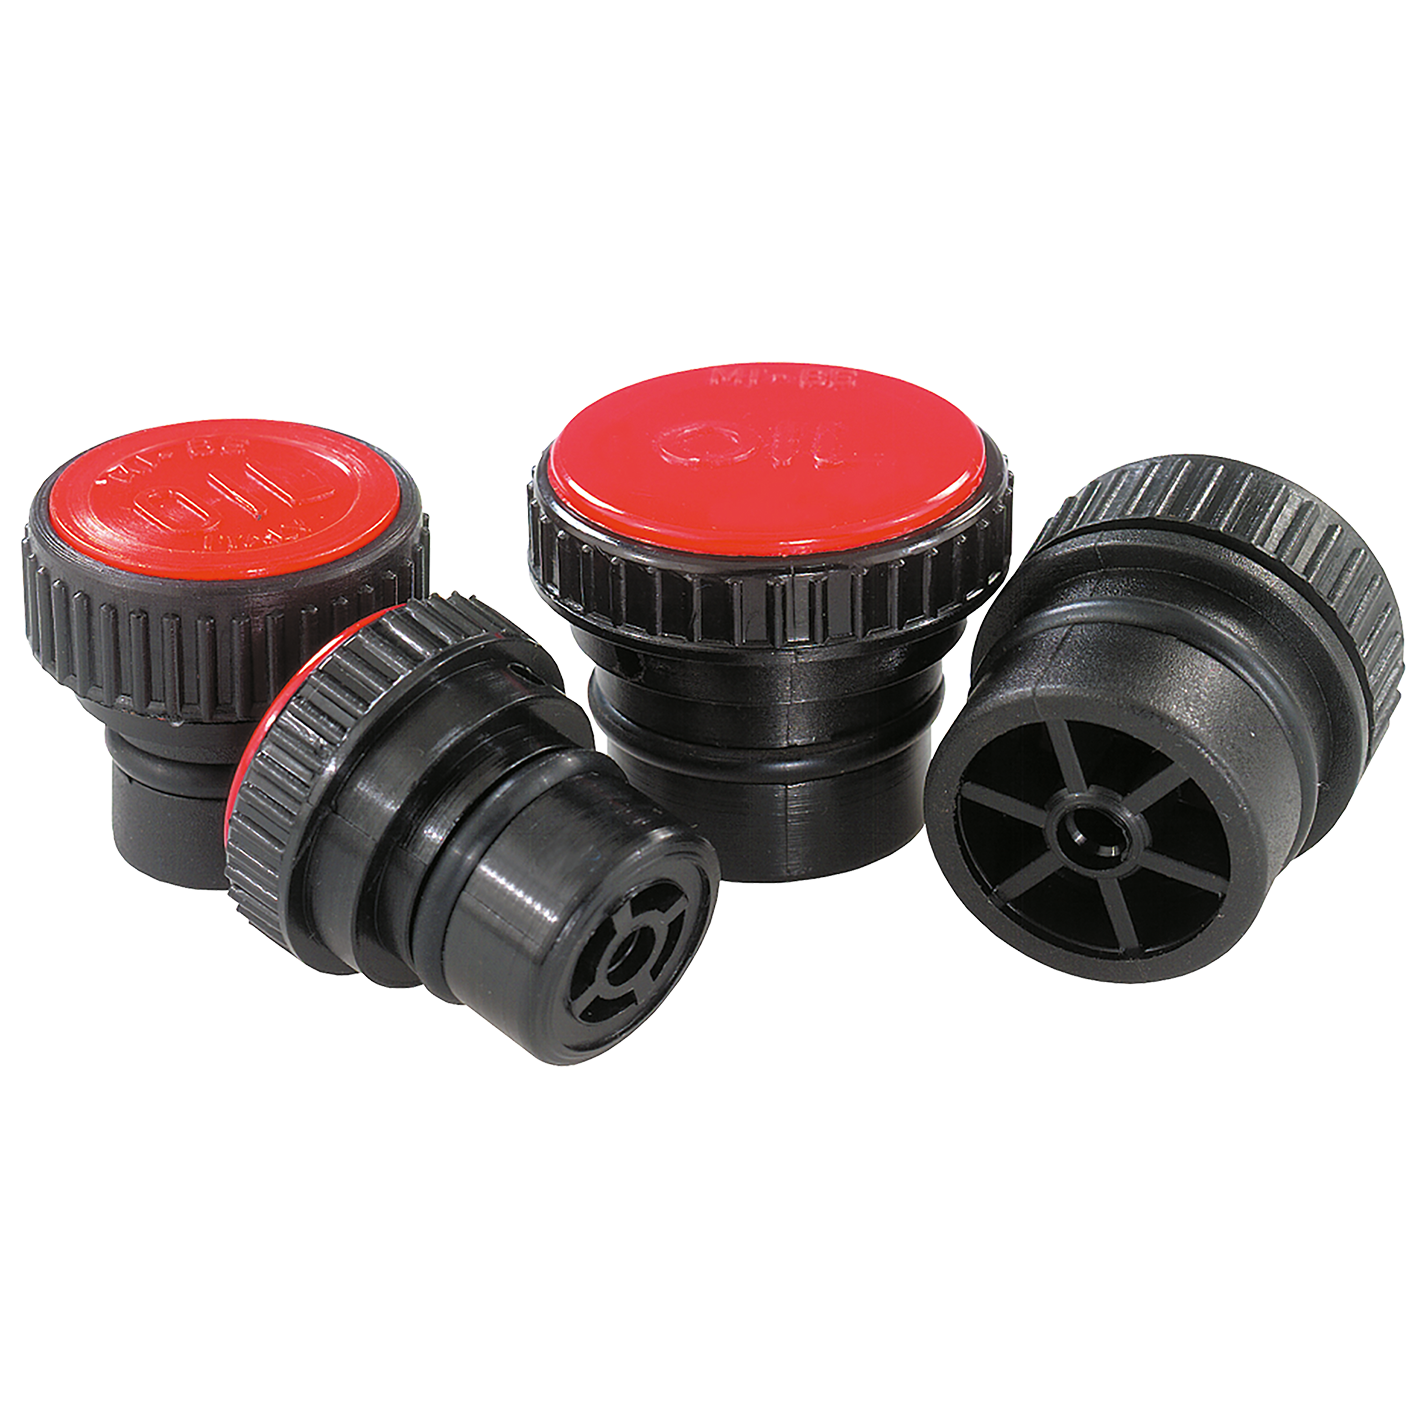 20MM PRESS-IN PLUGS WITH VENT